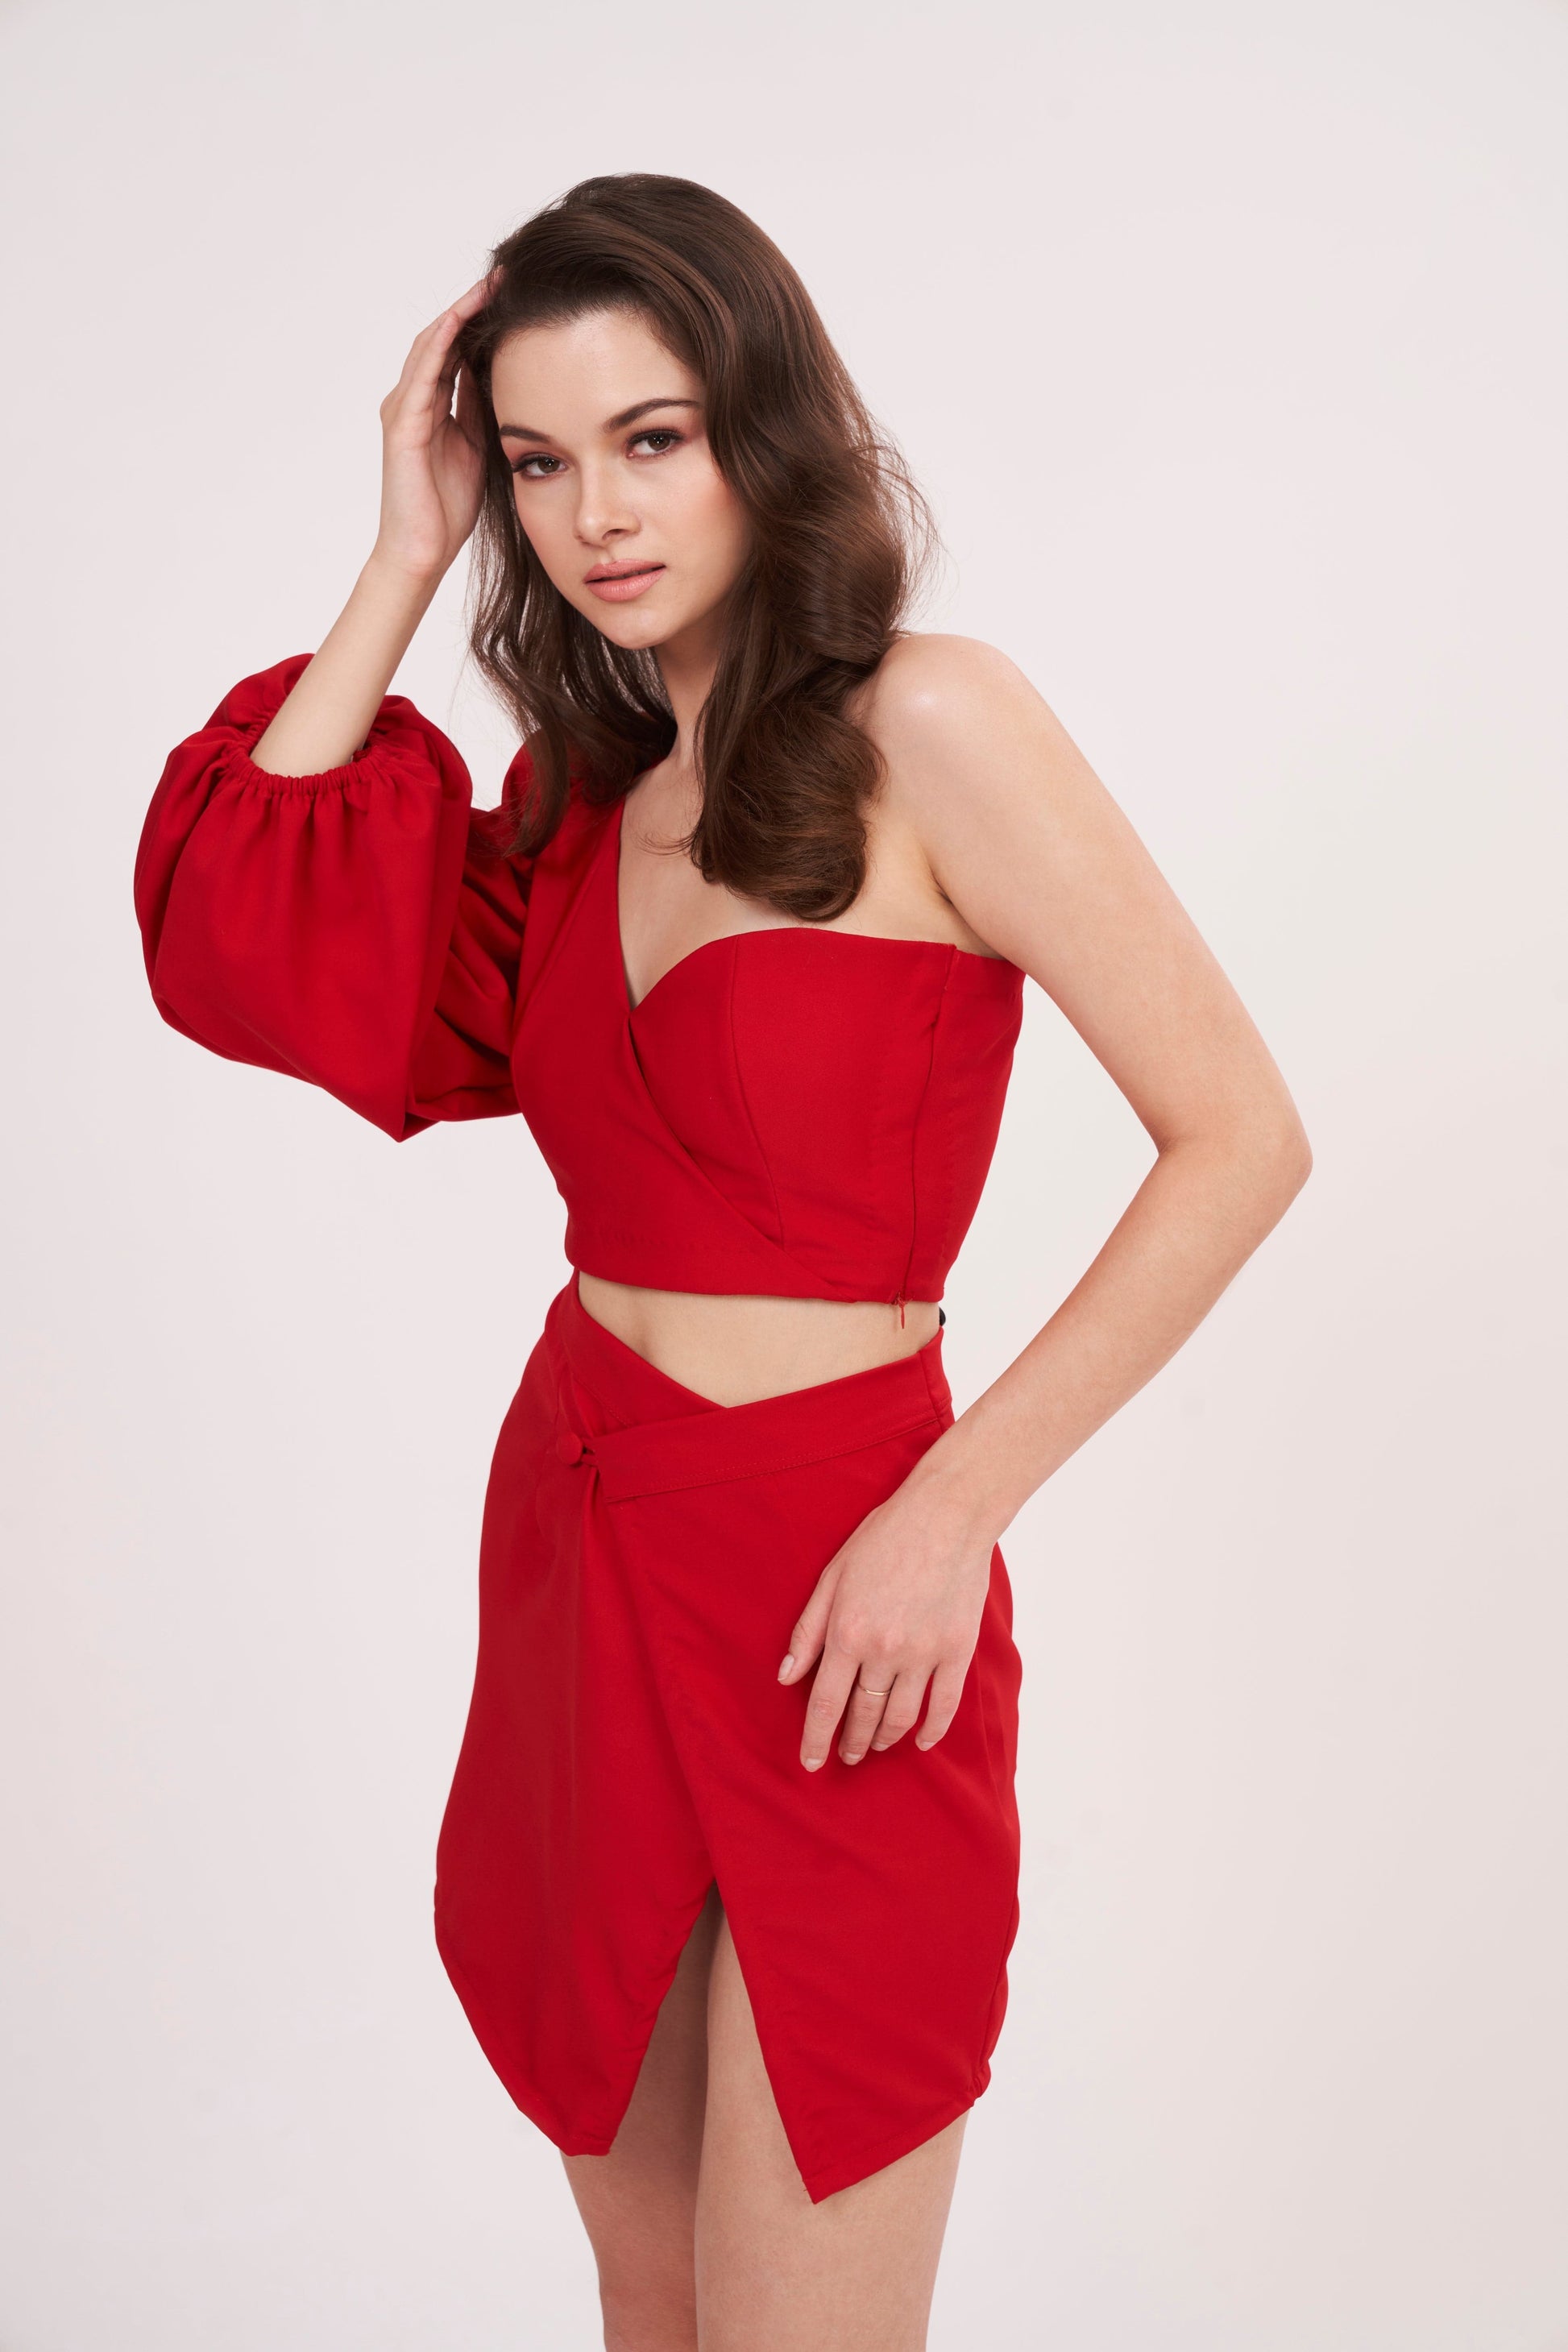 One-sleeve Ravishing Red top, perfect for formal and casual occasions. Feminine style adds a hint of sexiness and glamour to any outfit.